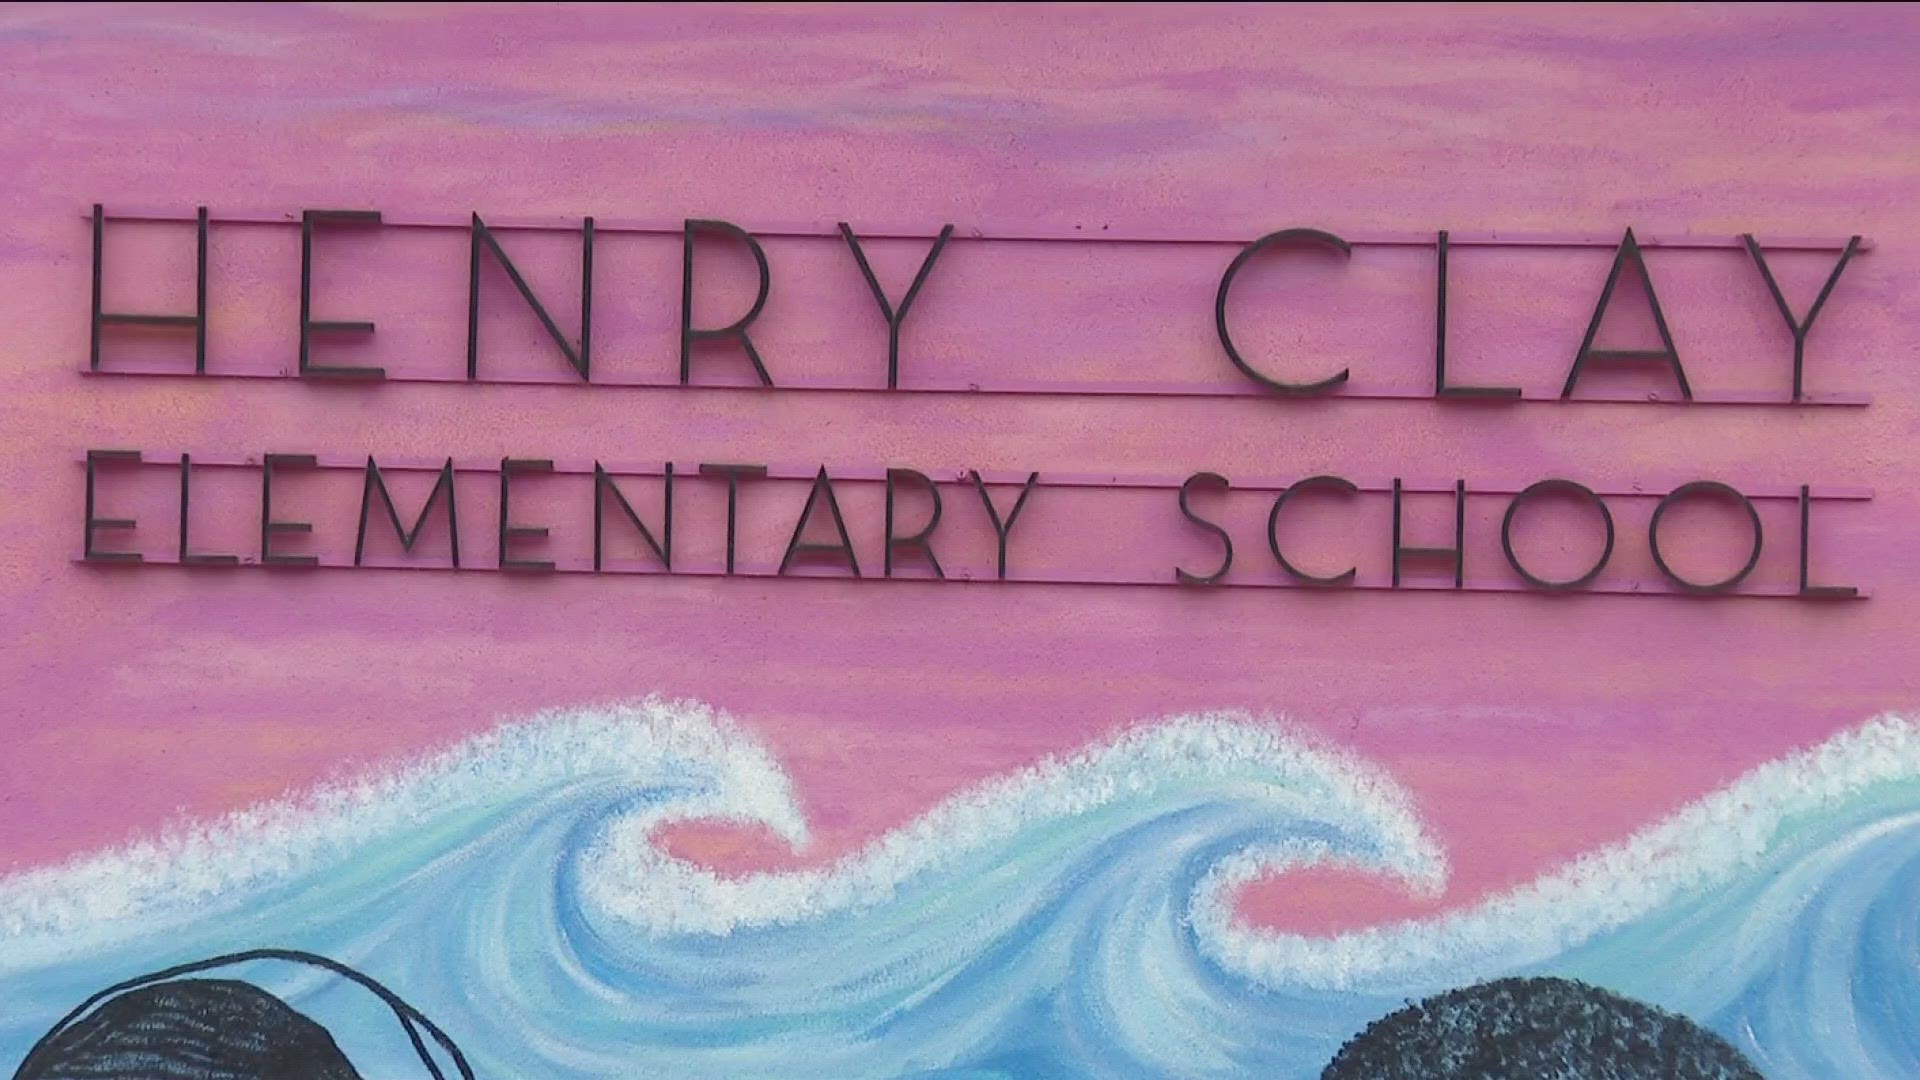 Henry Clay Elementary is named after a former congressman who not only kept slaves, but was responsible for the expansion of slavery into other states.